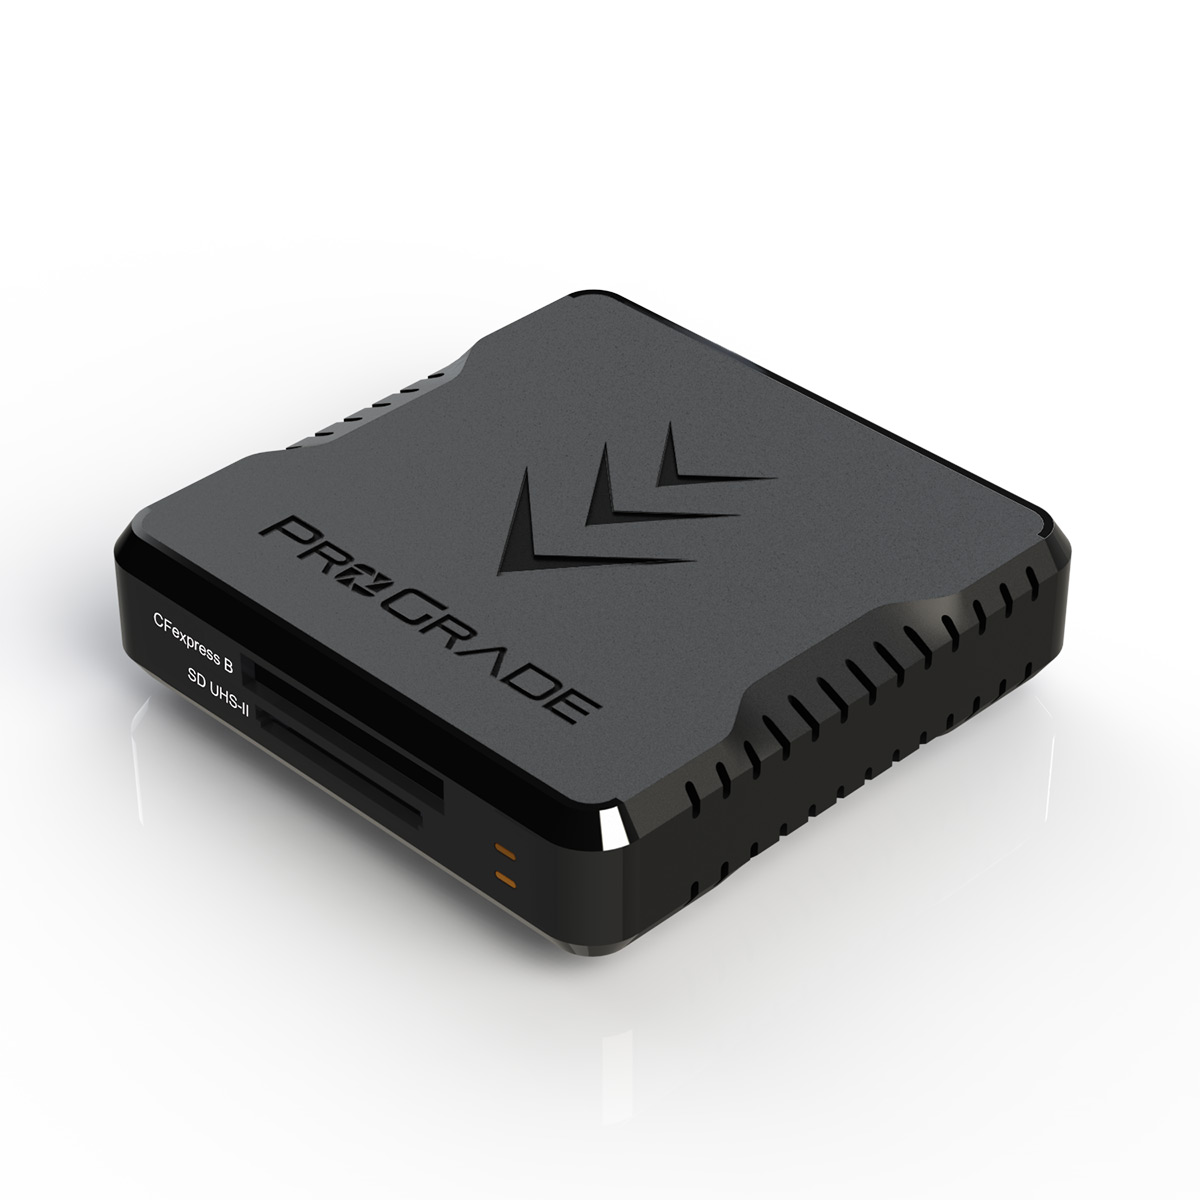 ProGrade SD/CFexpress (Type B) Card Reader product image